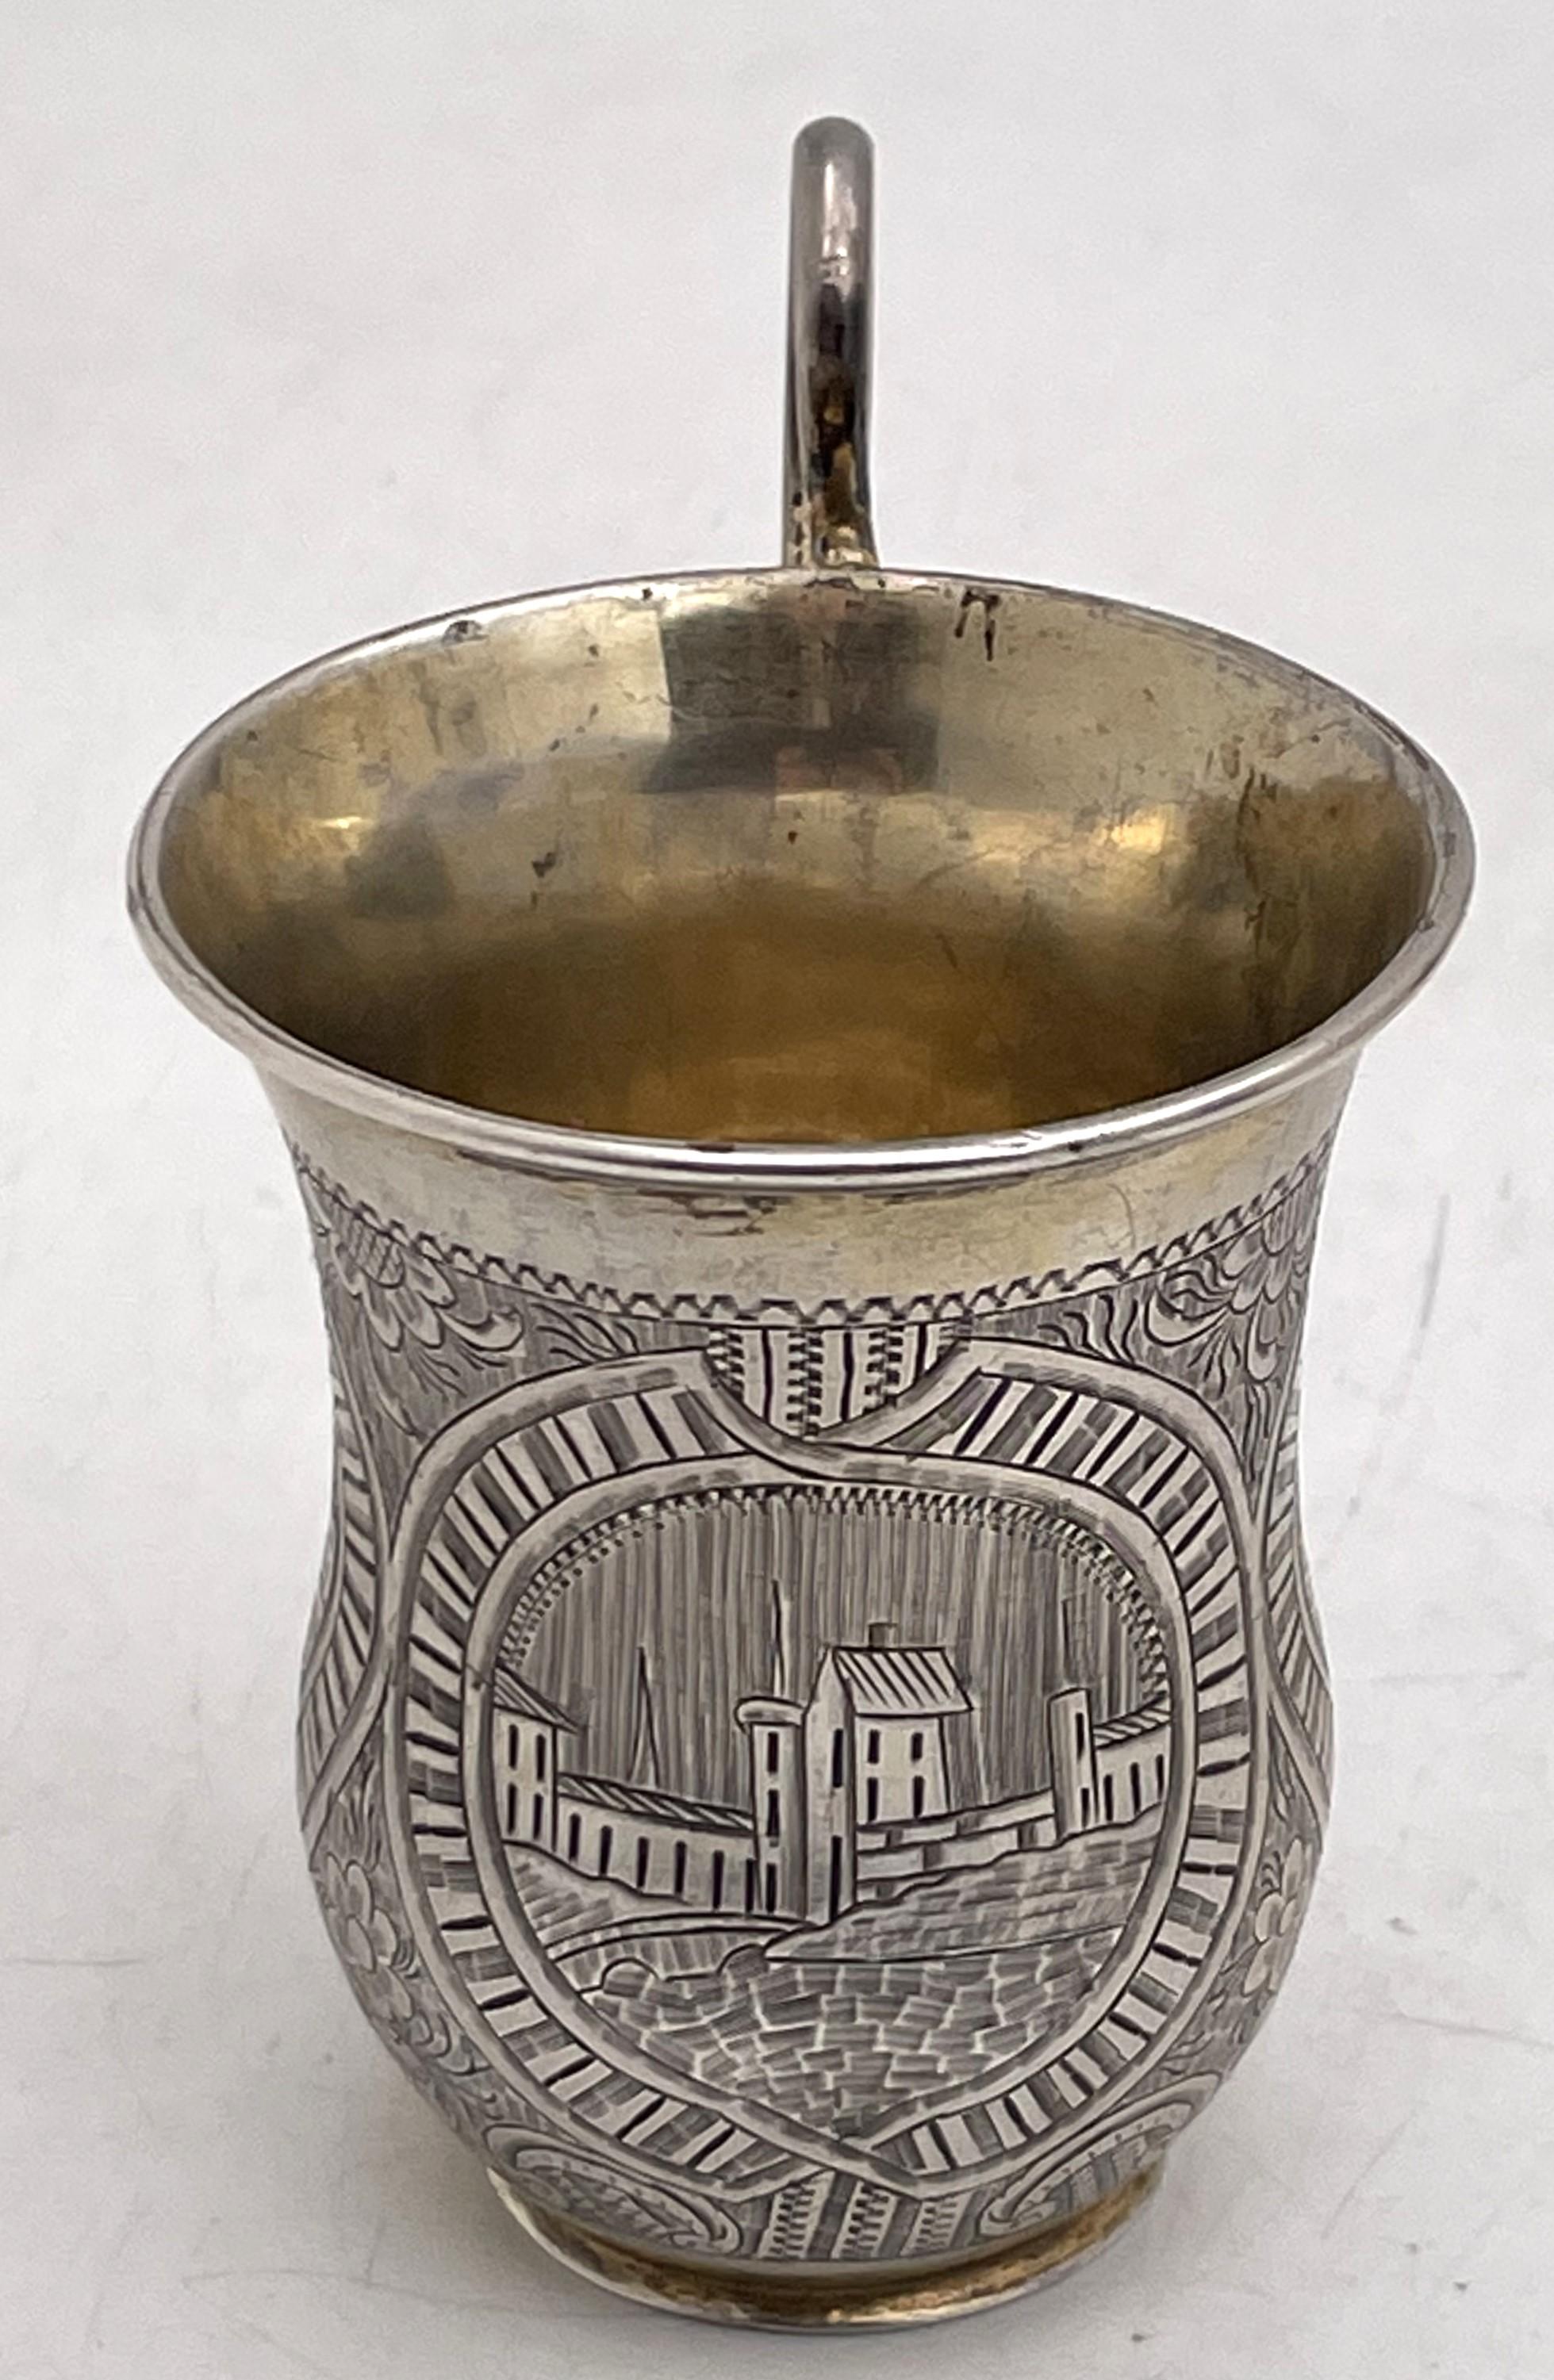 Russian 0.84 silver, partially gilt, vodka mug, made in Saint Petersburg in 1851, showcasing stylized floral and architectural motifs. It measures 3 1/8'' in height by 2 1/8'' in diameter at the top and bear hallmarks as shown. 

Please feel free to